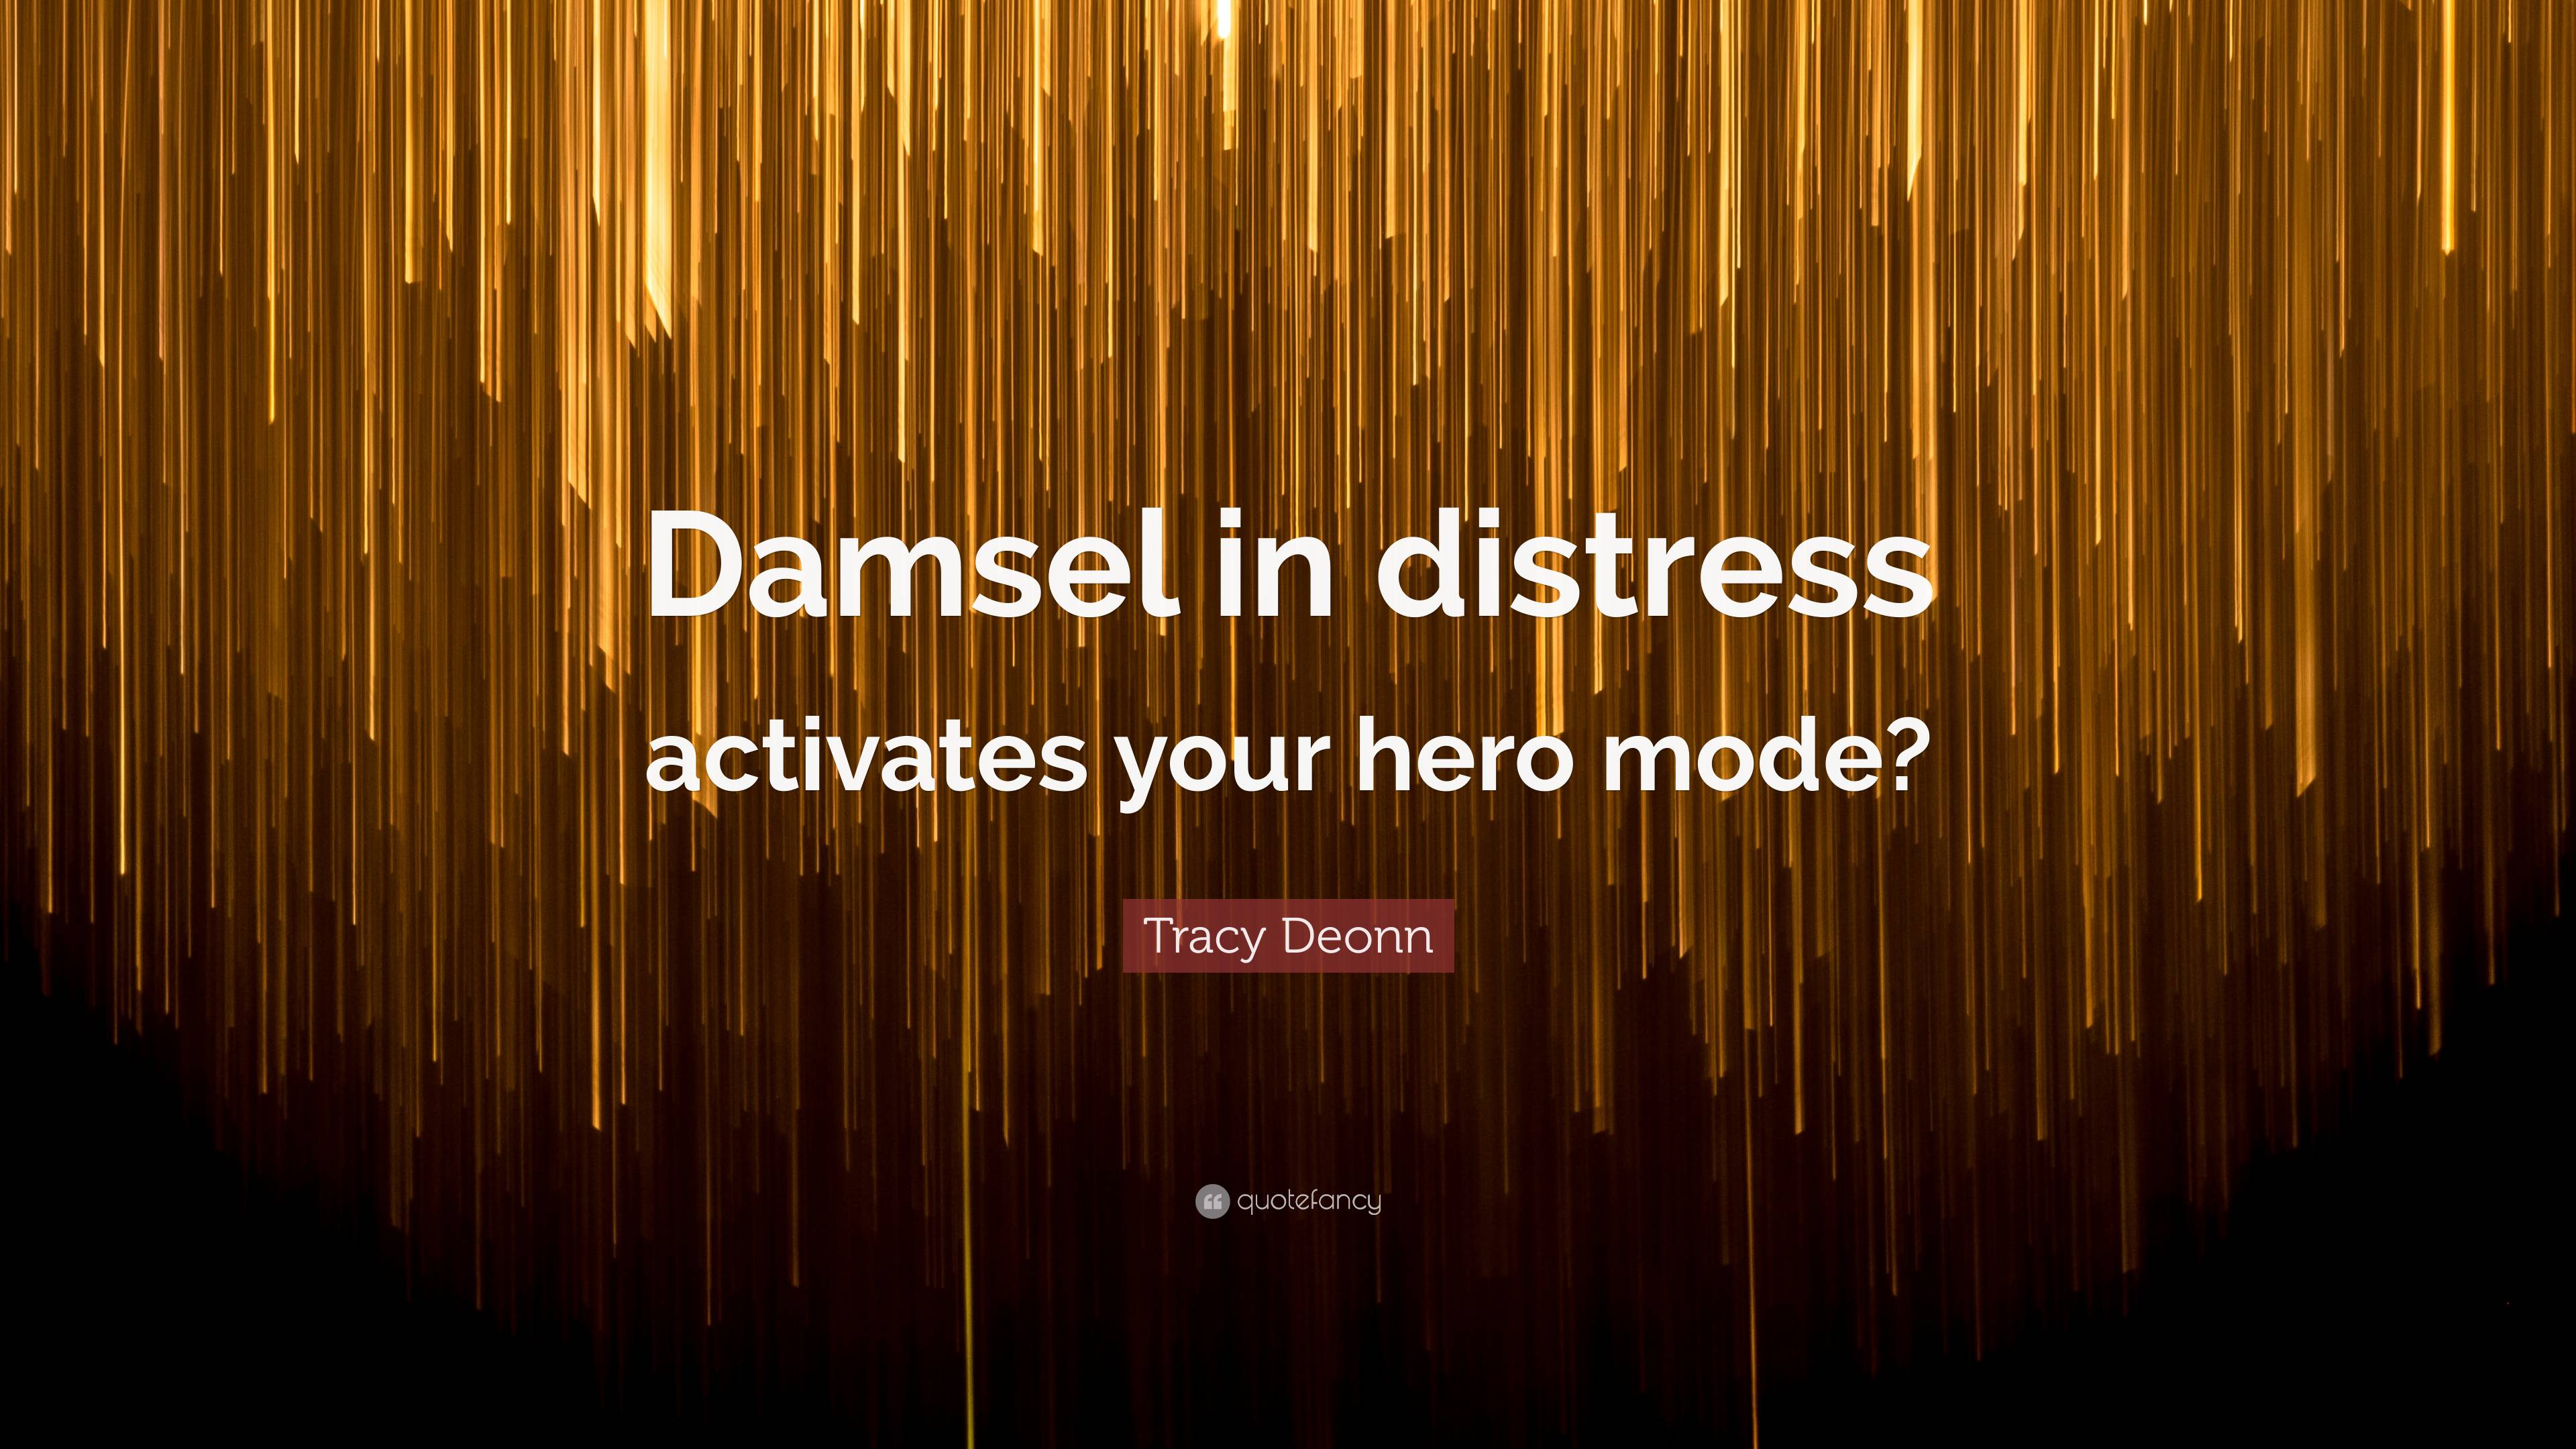 Tracy Deonn Quote: “Damsel in distress activates your hero mode?”